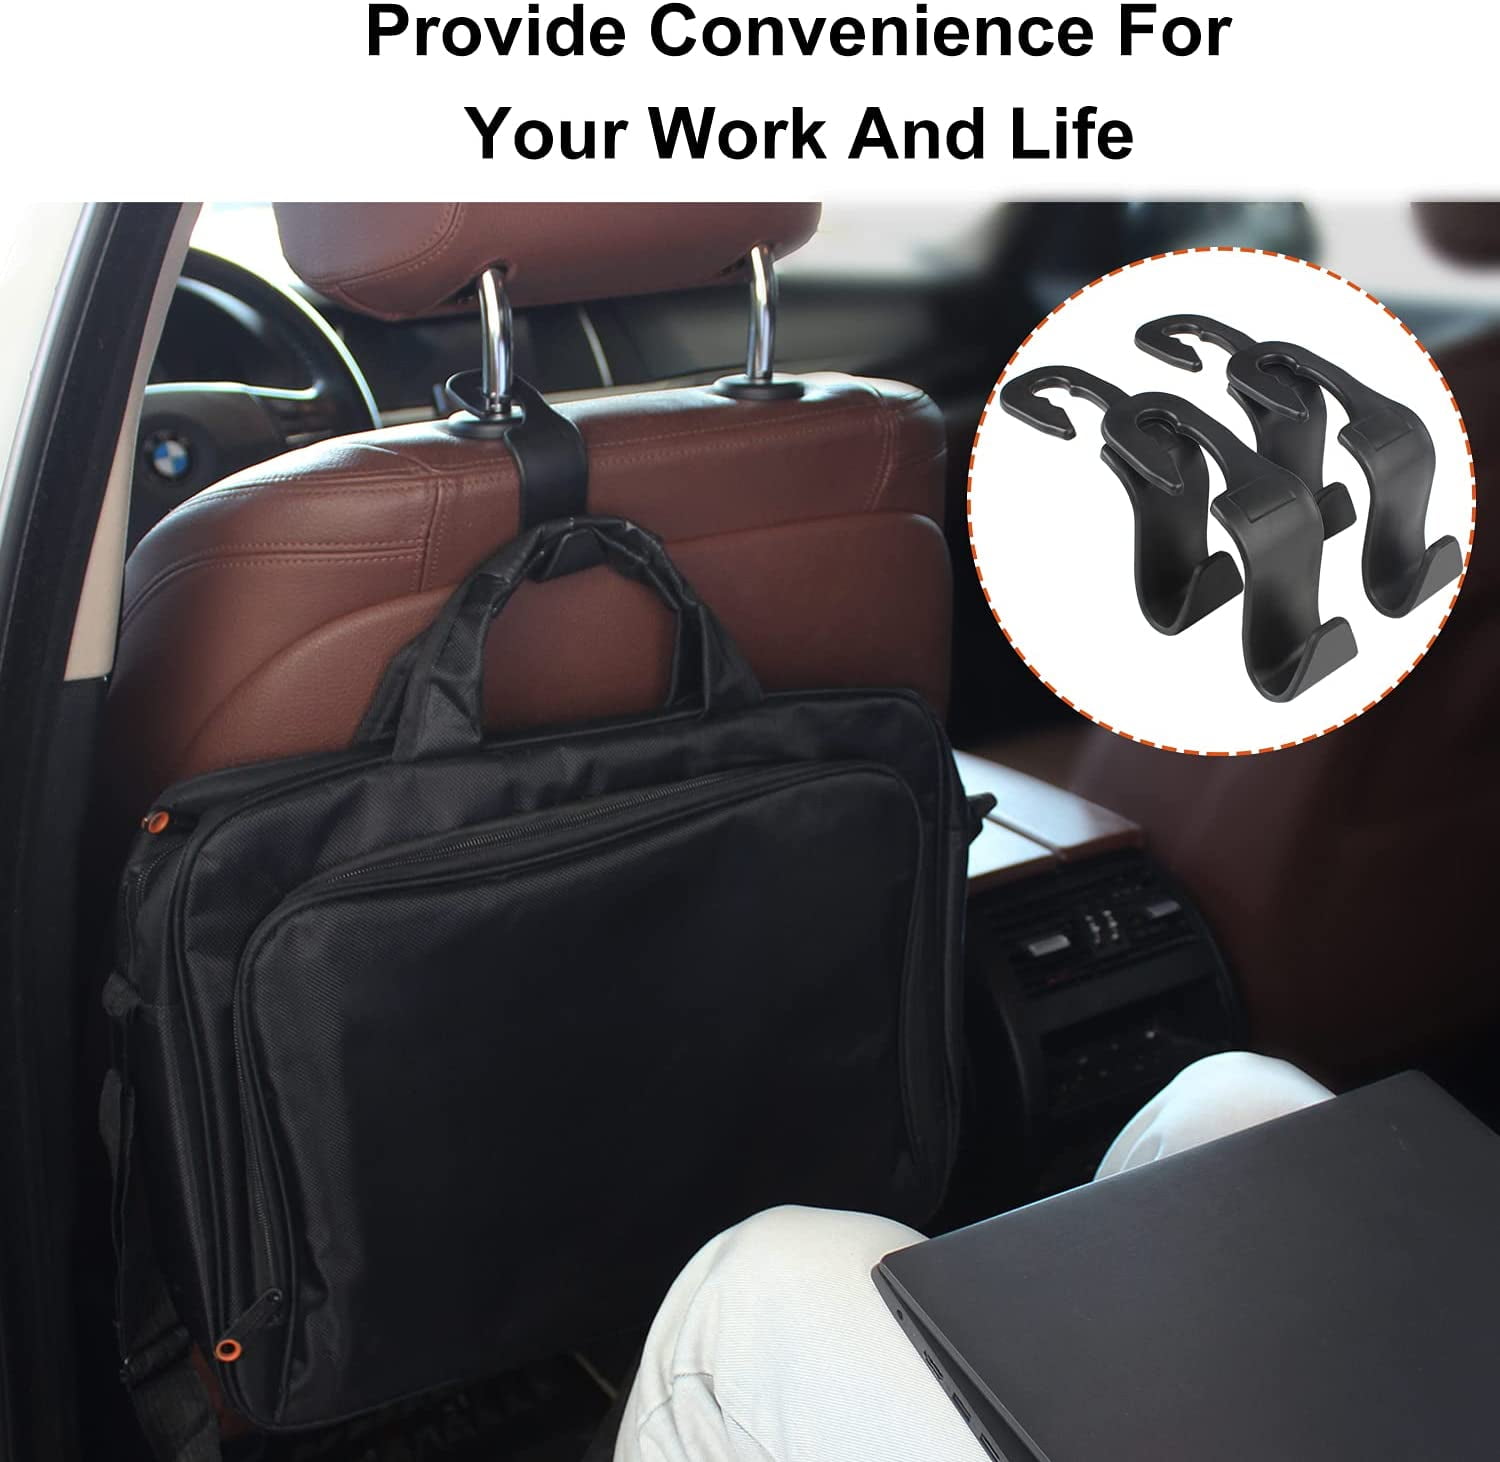 Universal Car Headrest Vue Lifecycle Hooks Set Of 4 For Back Seat, Bag,  Purse, Cloth, And Grocery Organizer From Yier63, $17.41